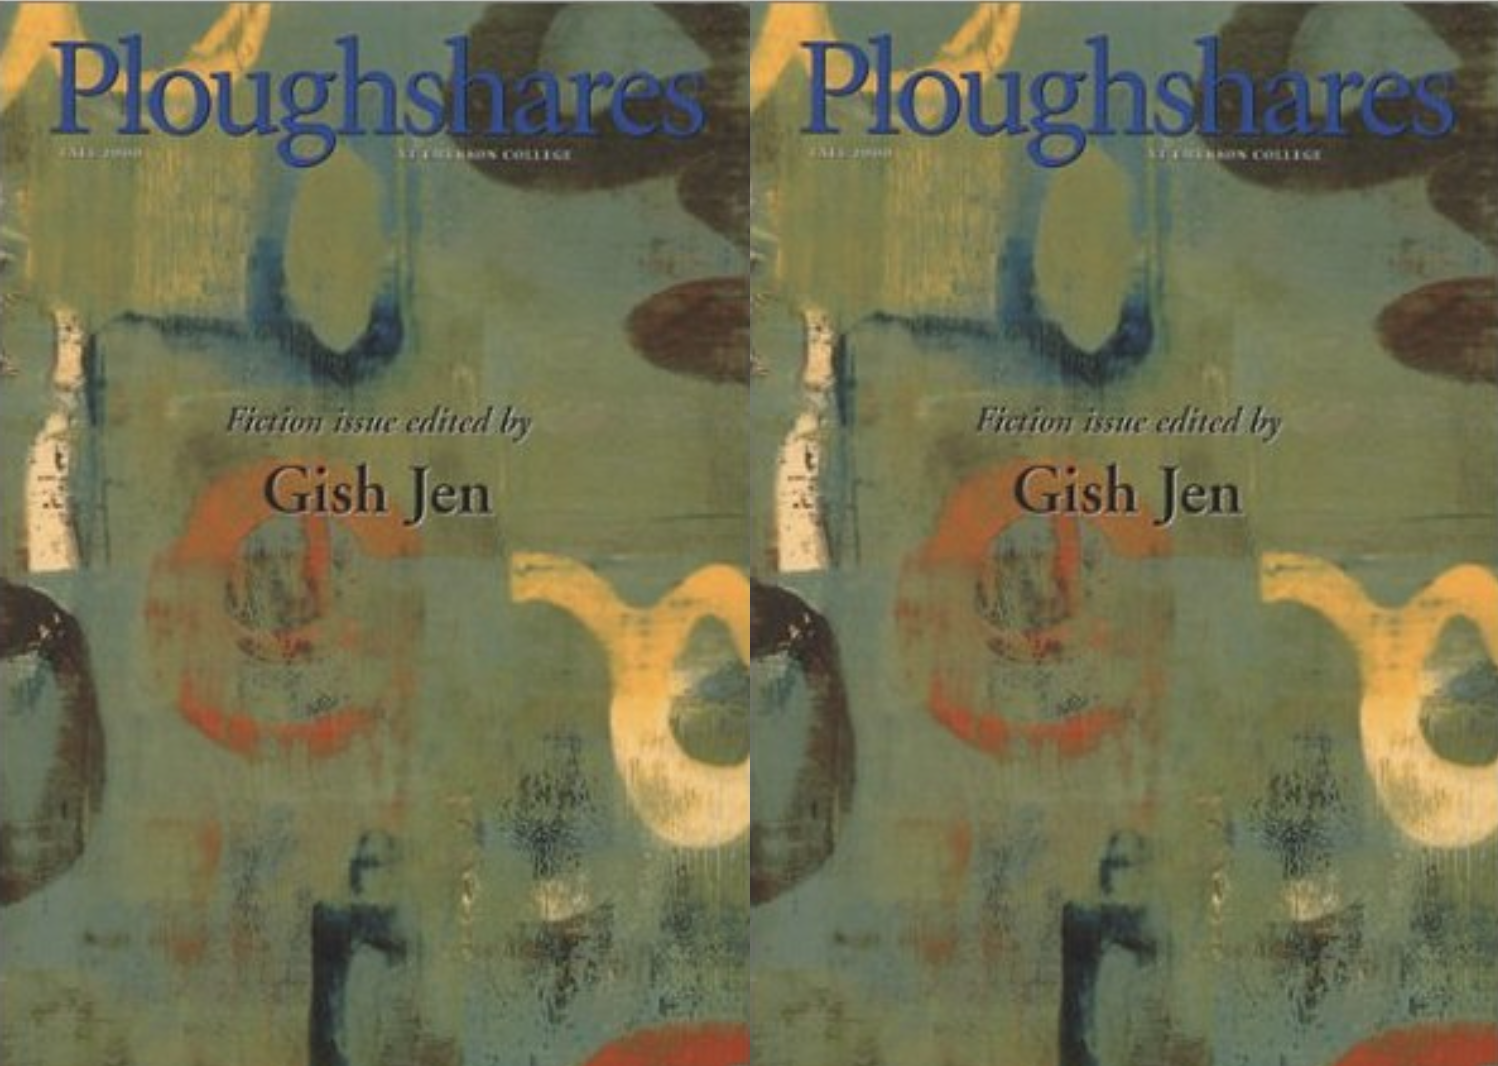 Cover art for Ploughshares edition edited by Gish Jen